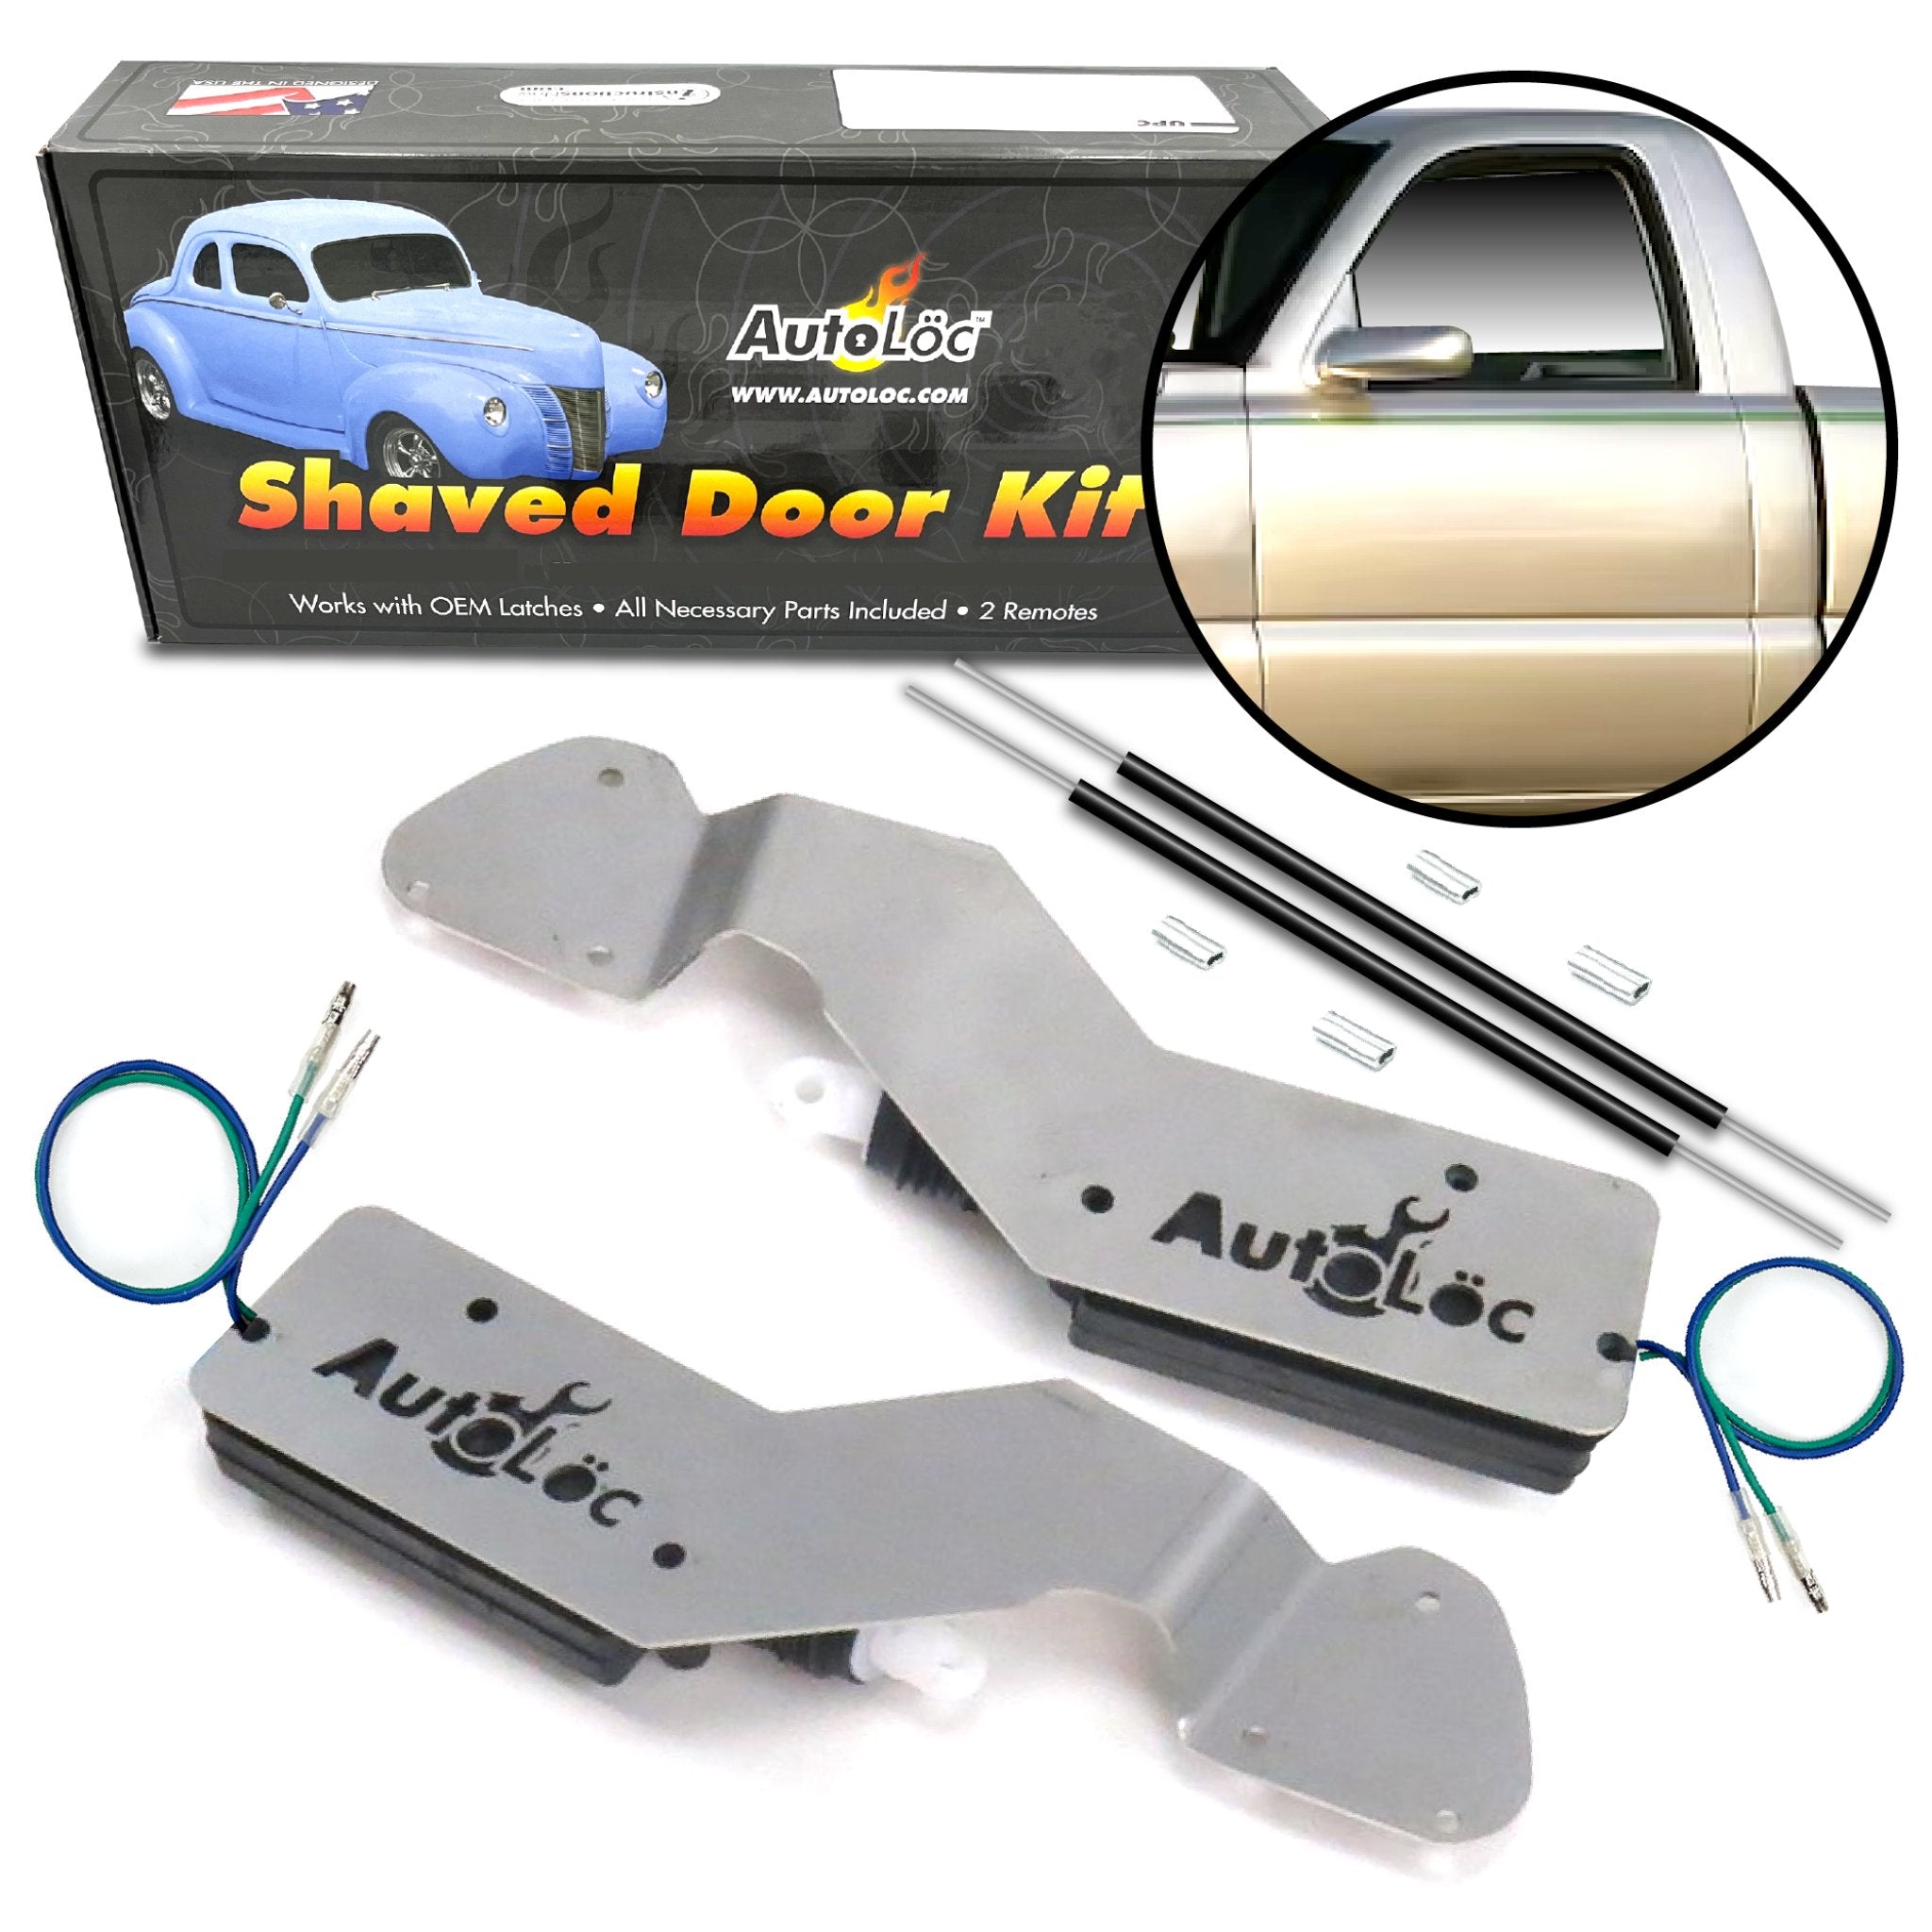 Bolt-On Shave Door Kit for 99-06 Full Size Chevy/GMC Trucks Heavy-Duty Actuators